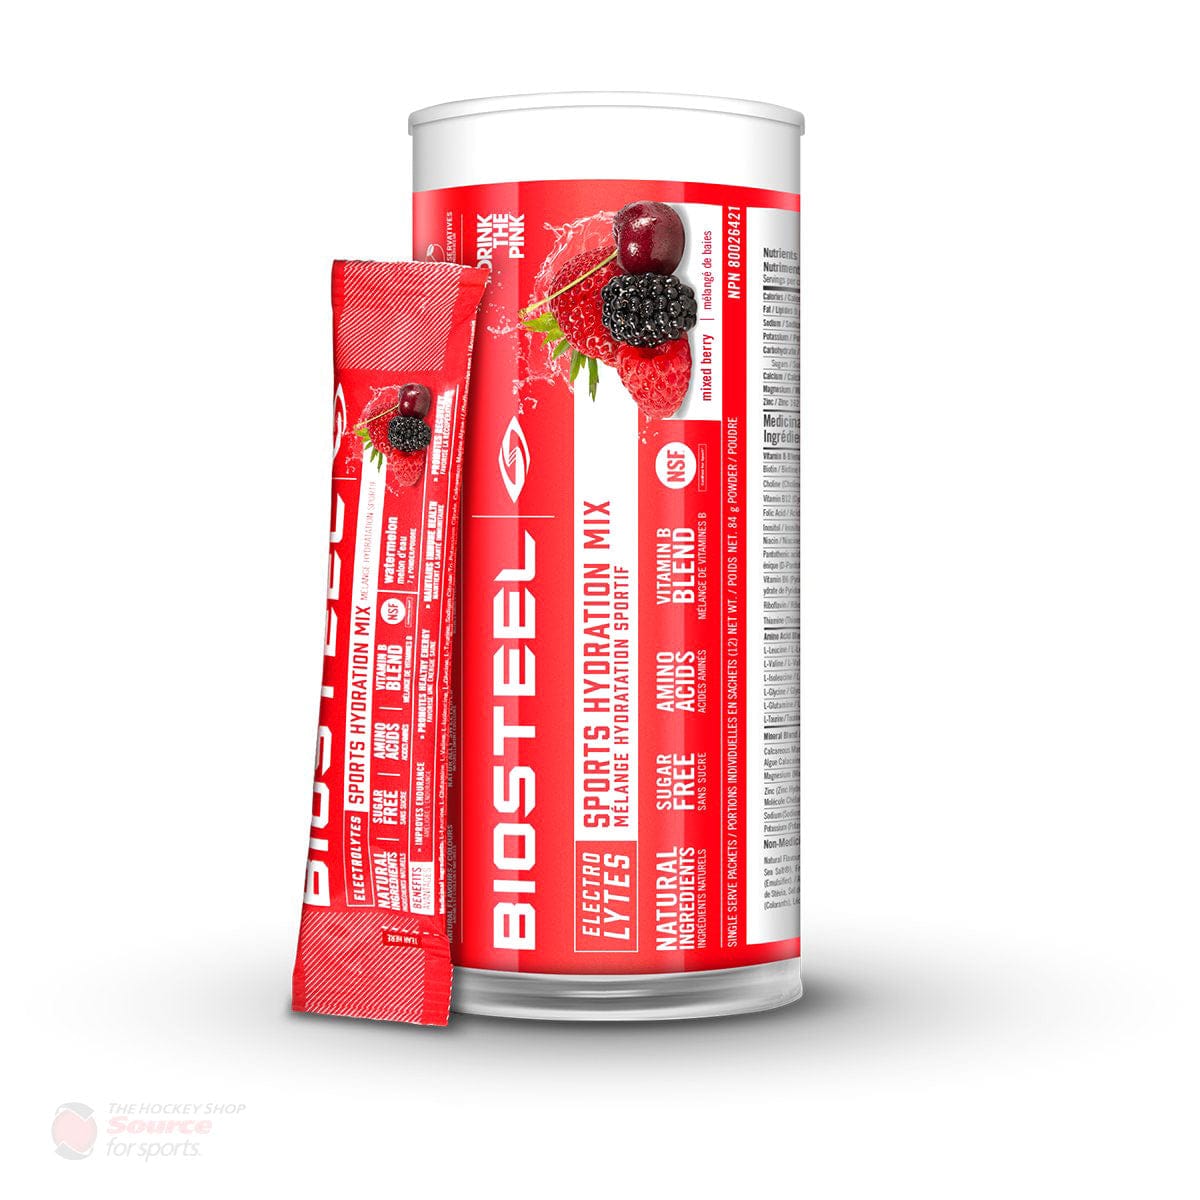 BioSteel High Performance Sports Mix - Mixed Berry (12 Packets)